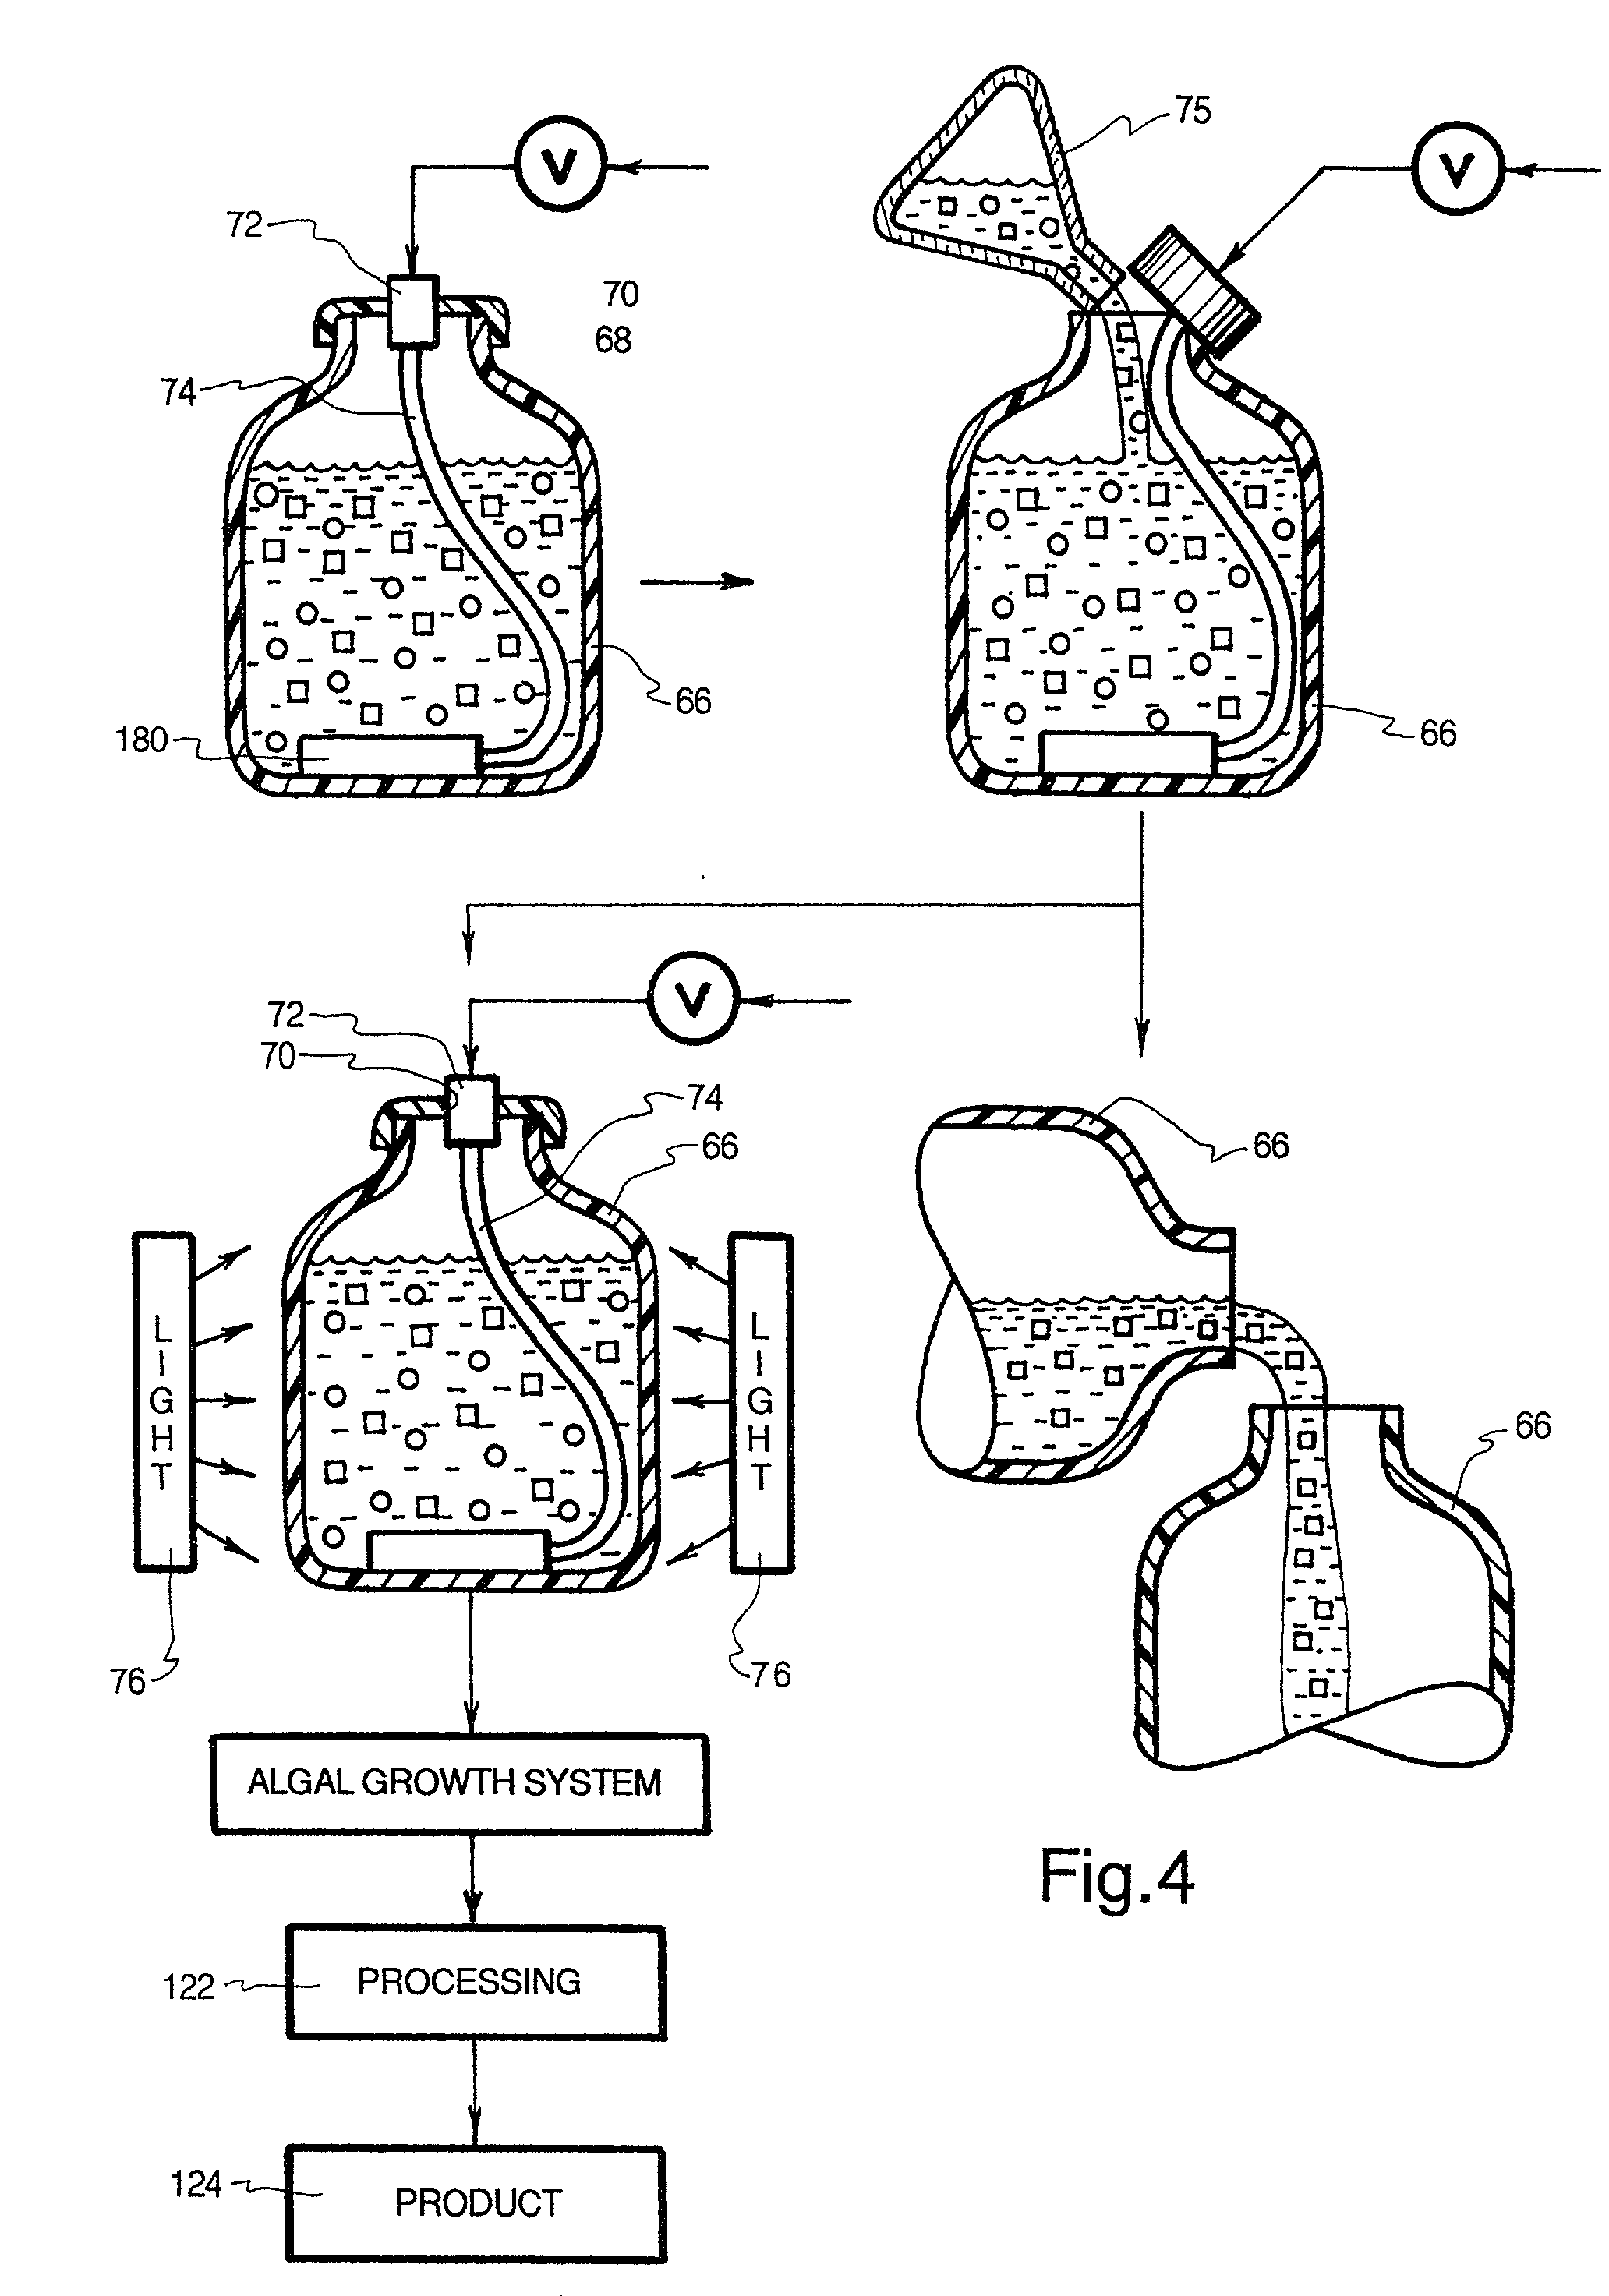 Process and apparatus for isolating and continuosly cultivating, harvesting, and processing of a substantially pure form of a desired species of algae